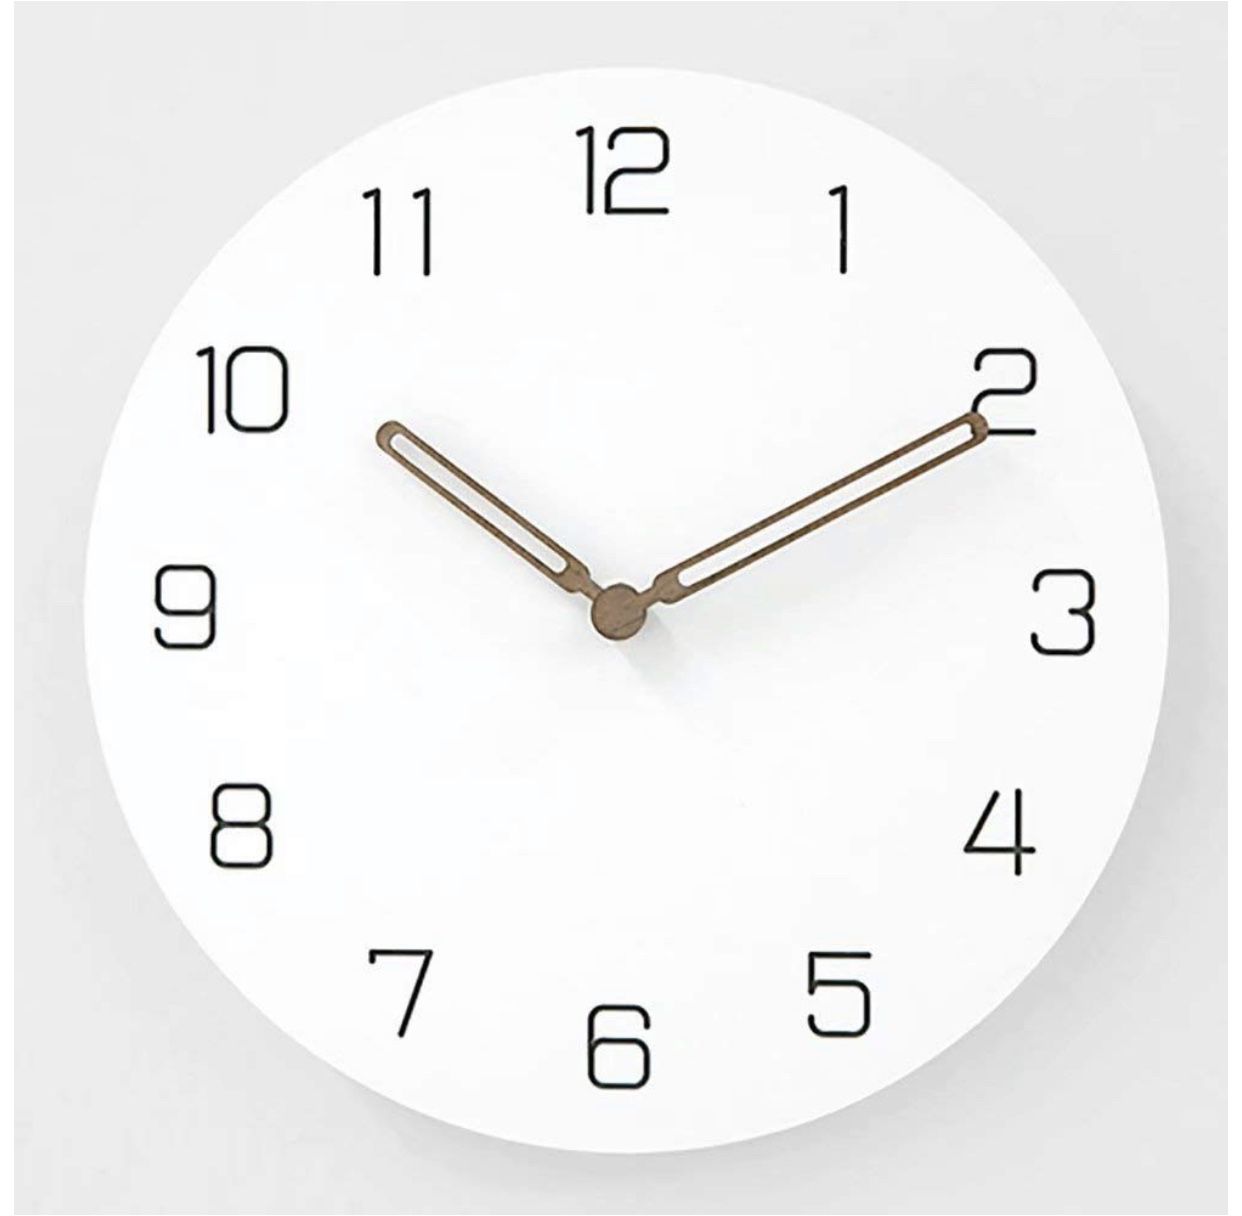 Modern Simple Wooden Wall Clock,Battery Operated Silent Non-Ticking Quartz Decorative Wood Hands Clocks for Living Room Home Office (12 inch)